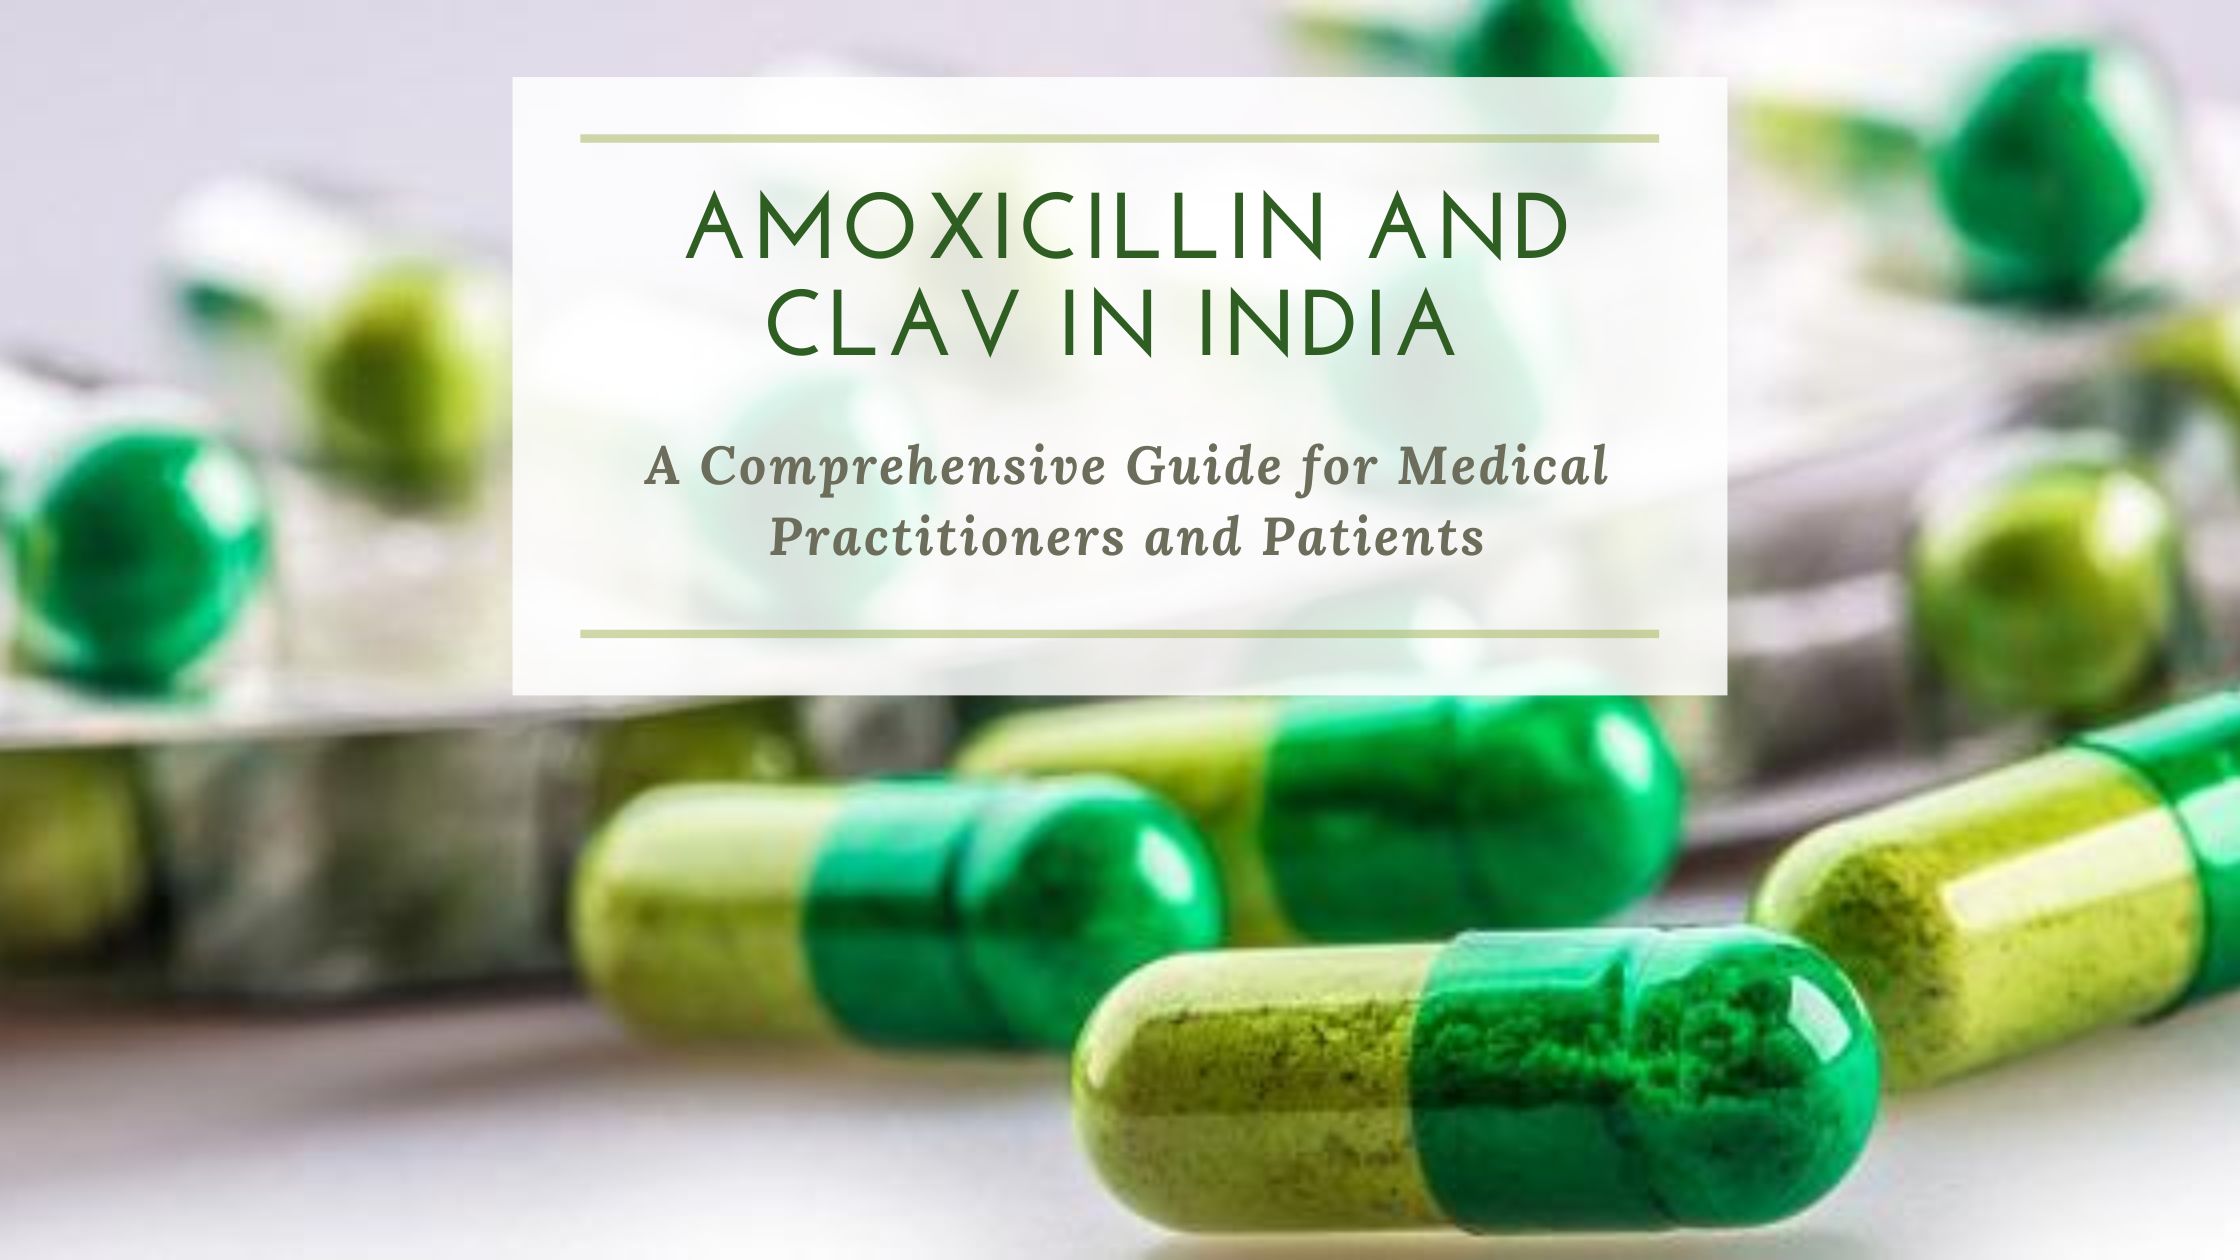 Amoxicillin and Clav in India - A Comprehensive Guide for Medical Practitioners and Patients